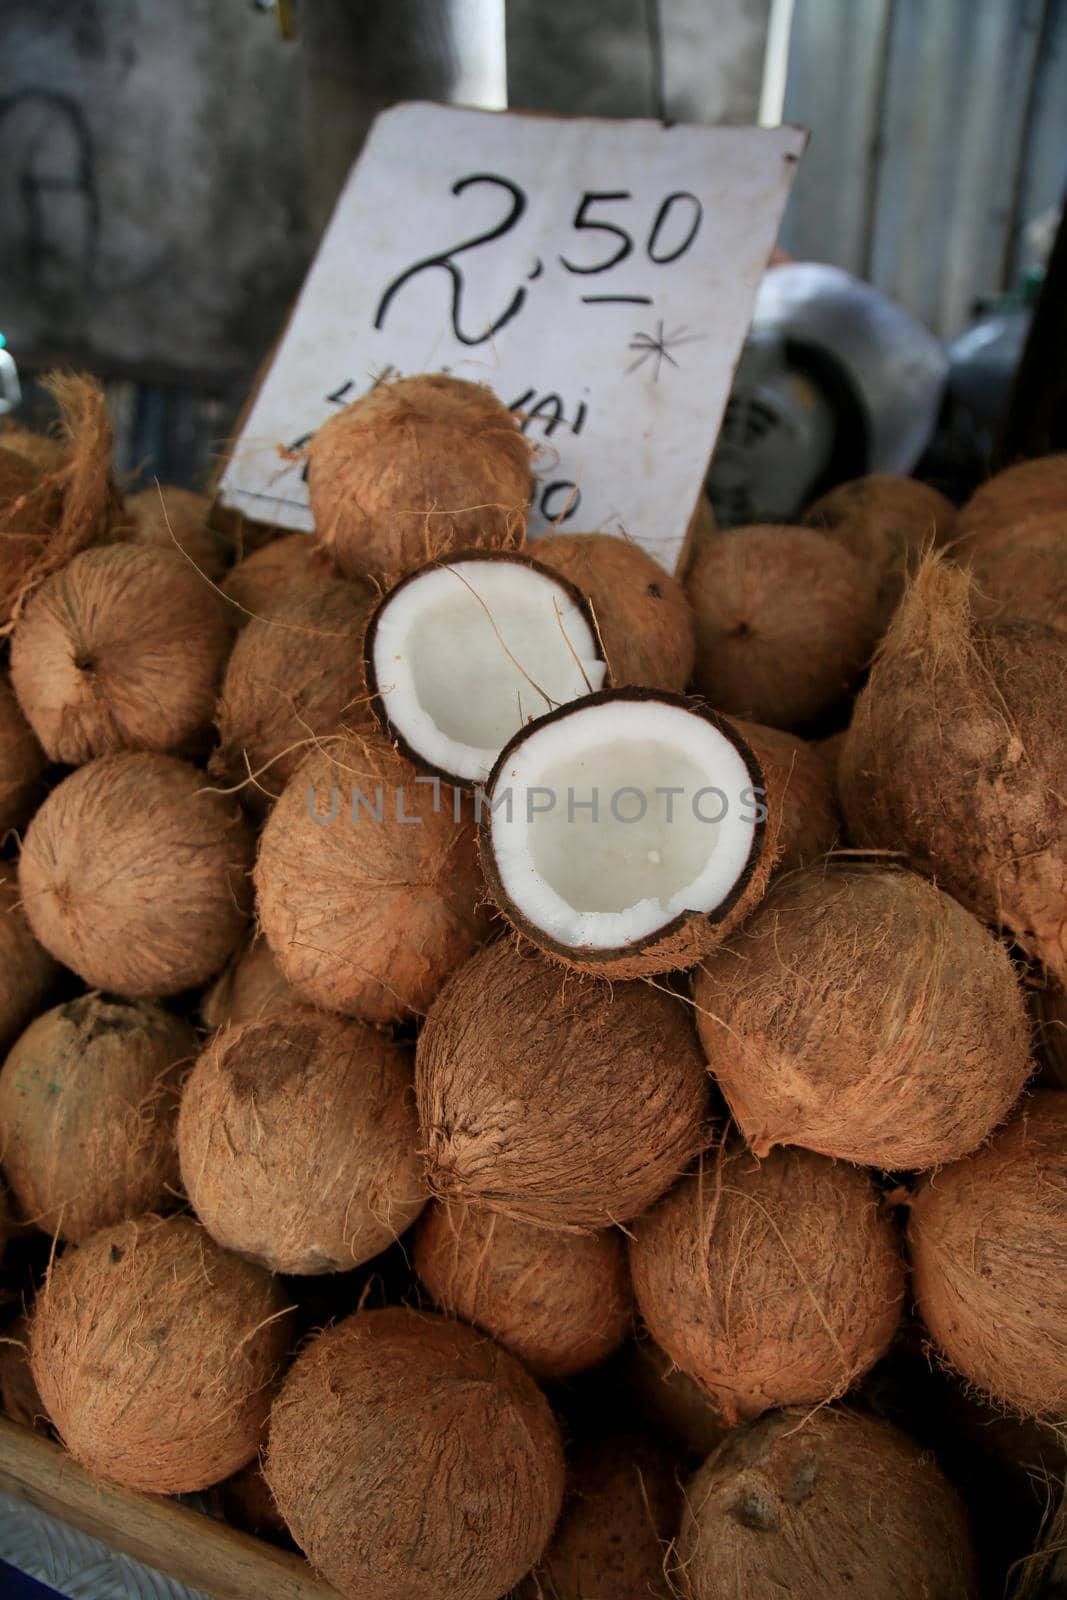 dry coconut for sale at fair by joasouza